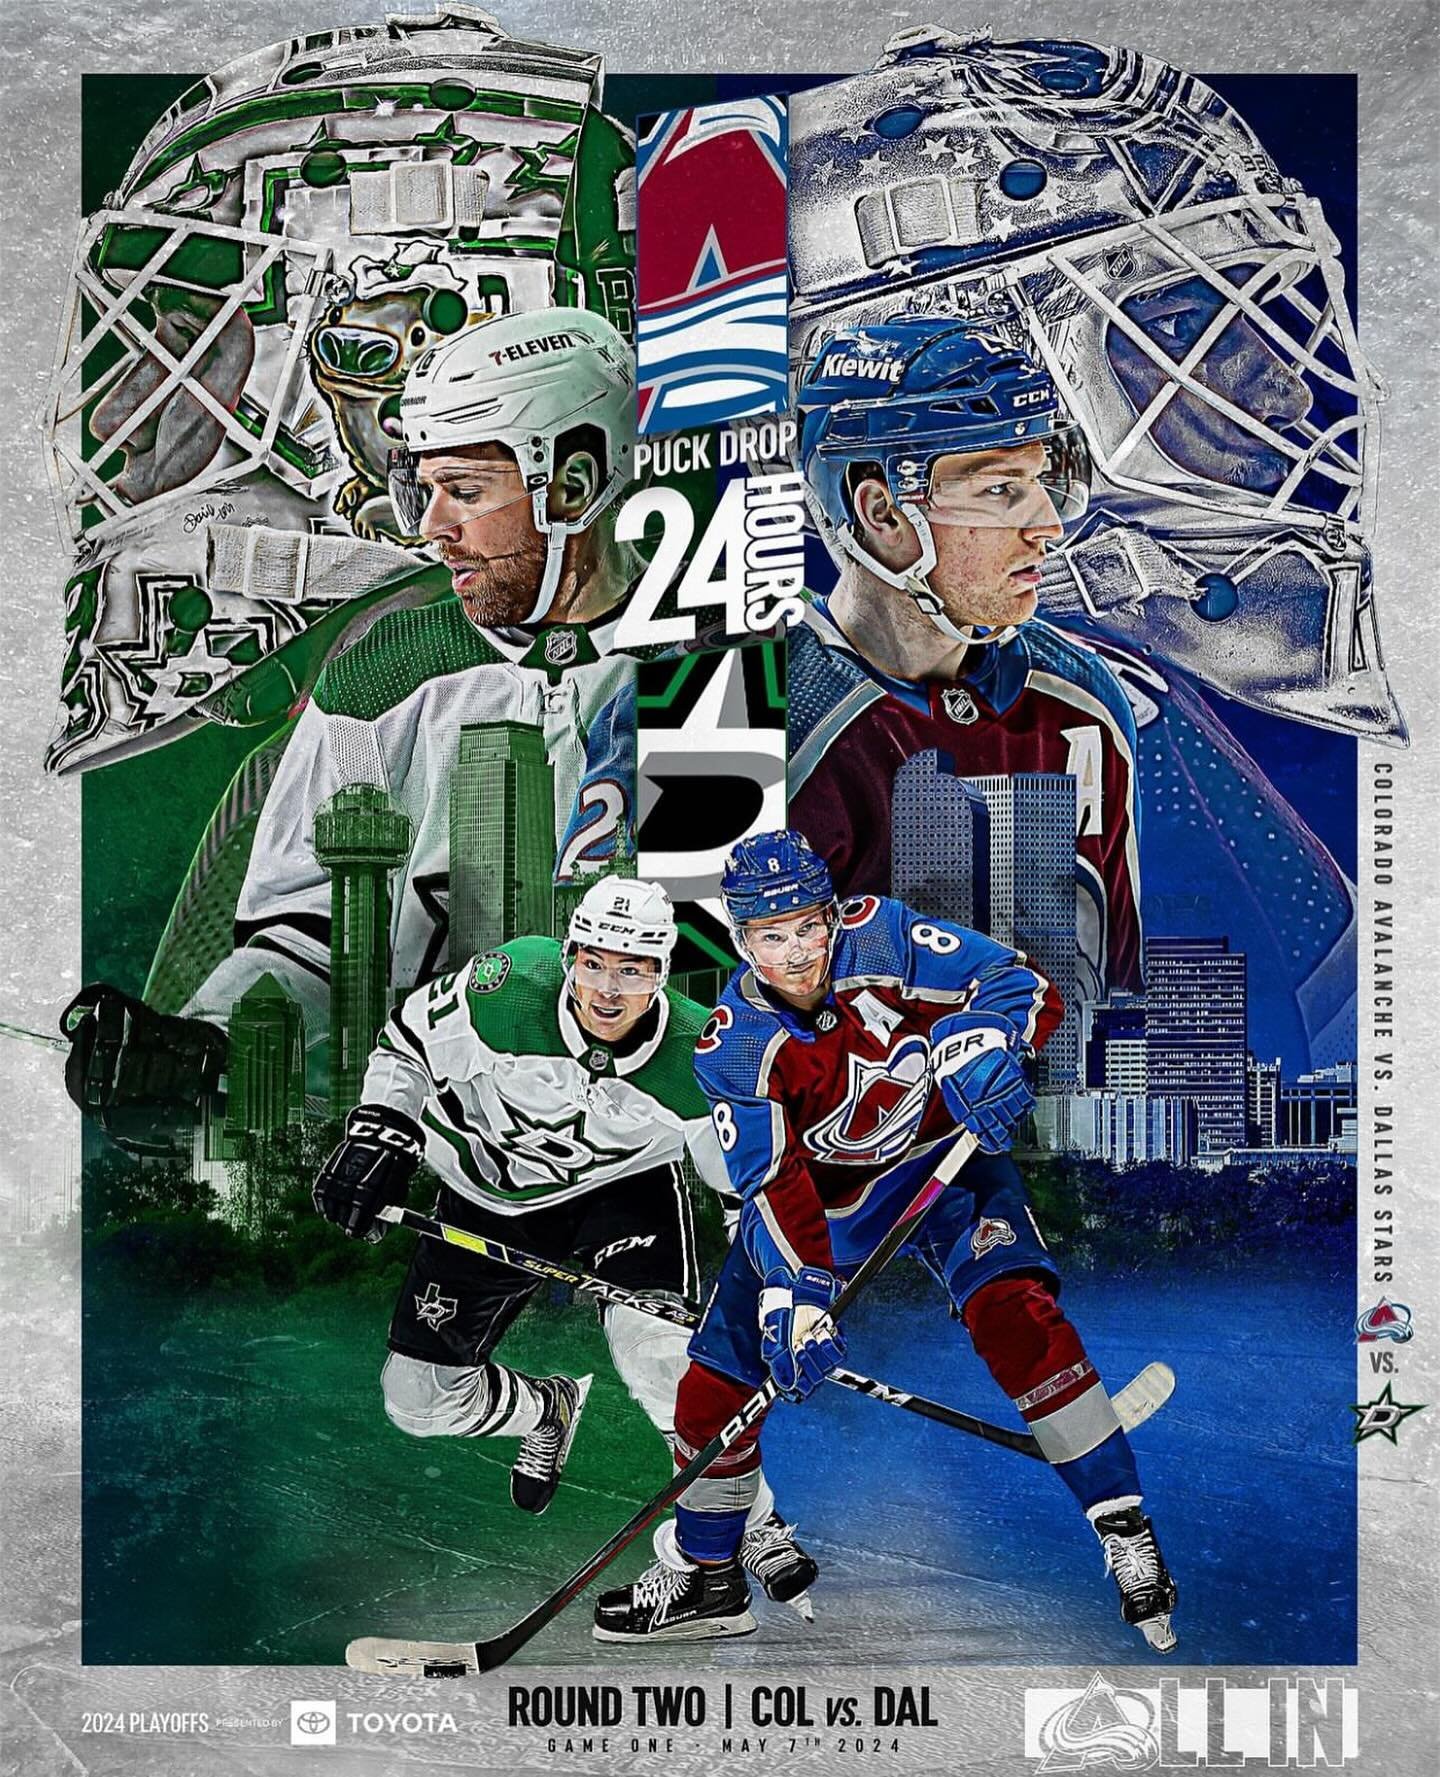 Round 2 of round 2s for Denver sports is kicking off tonight! Time for the Avs to handle some god damn business. 7:30 start time, free shots for Avs hat tricks and all of the friends yelling at TVs! Let&rsquo;s go!